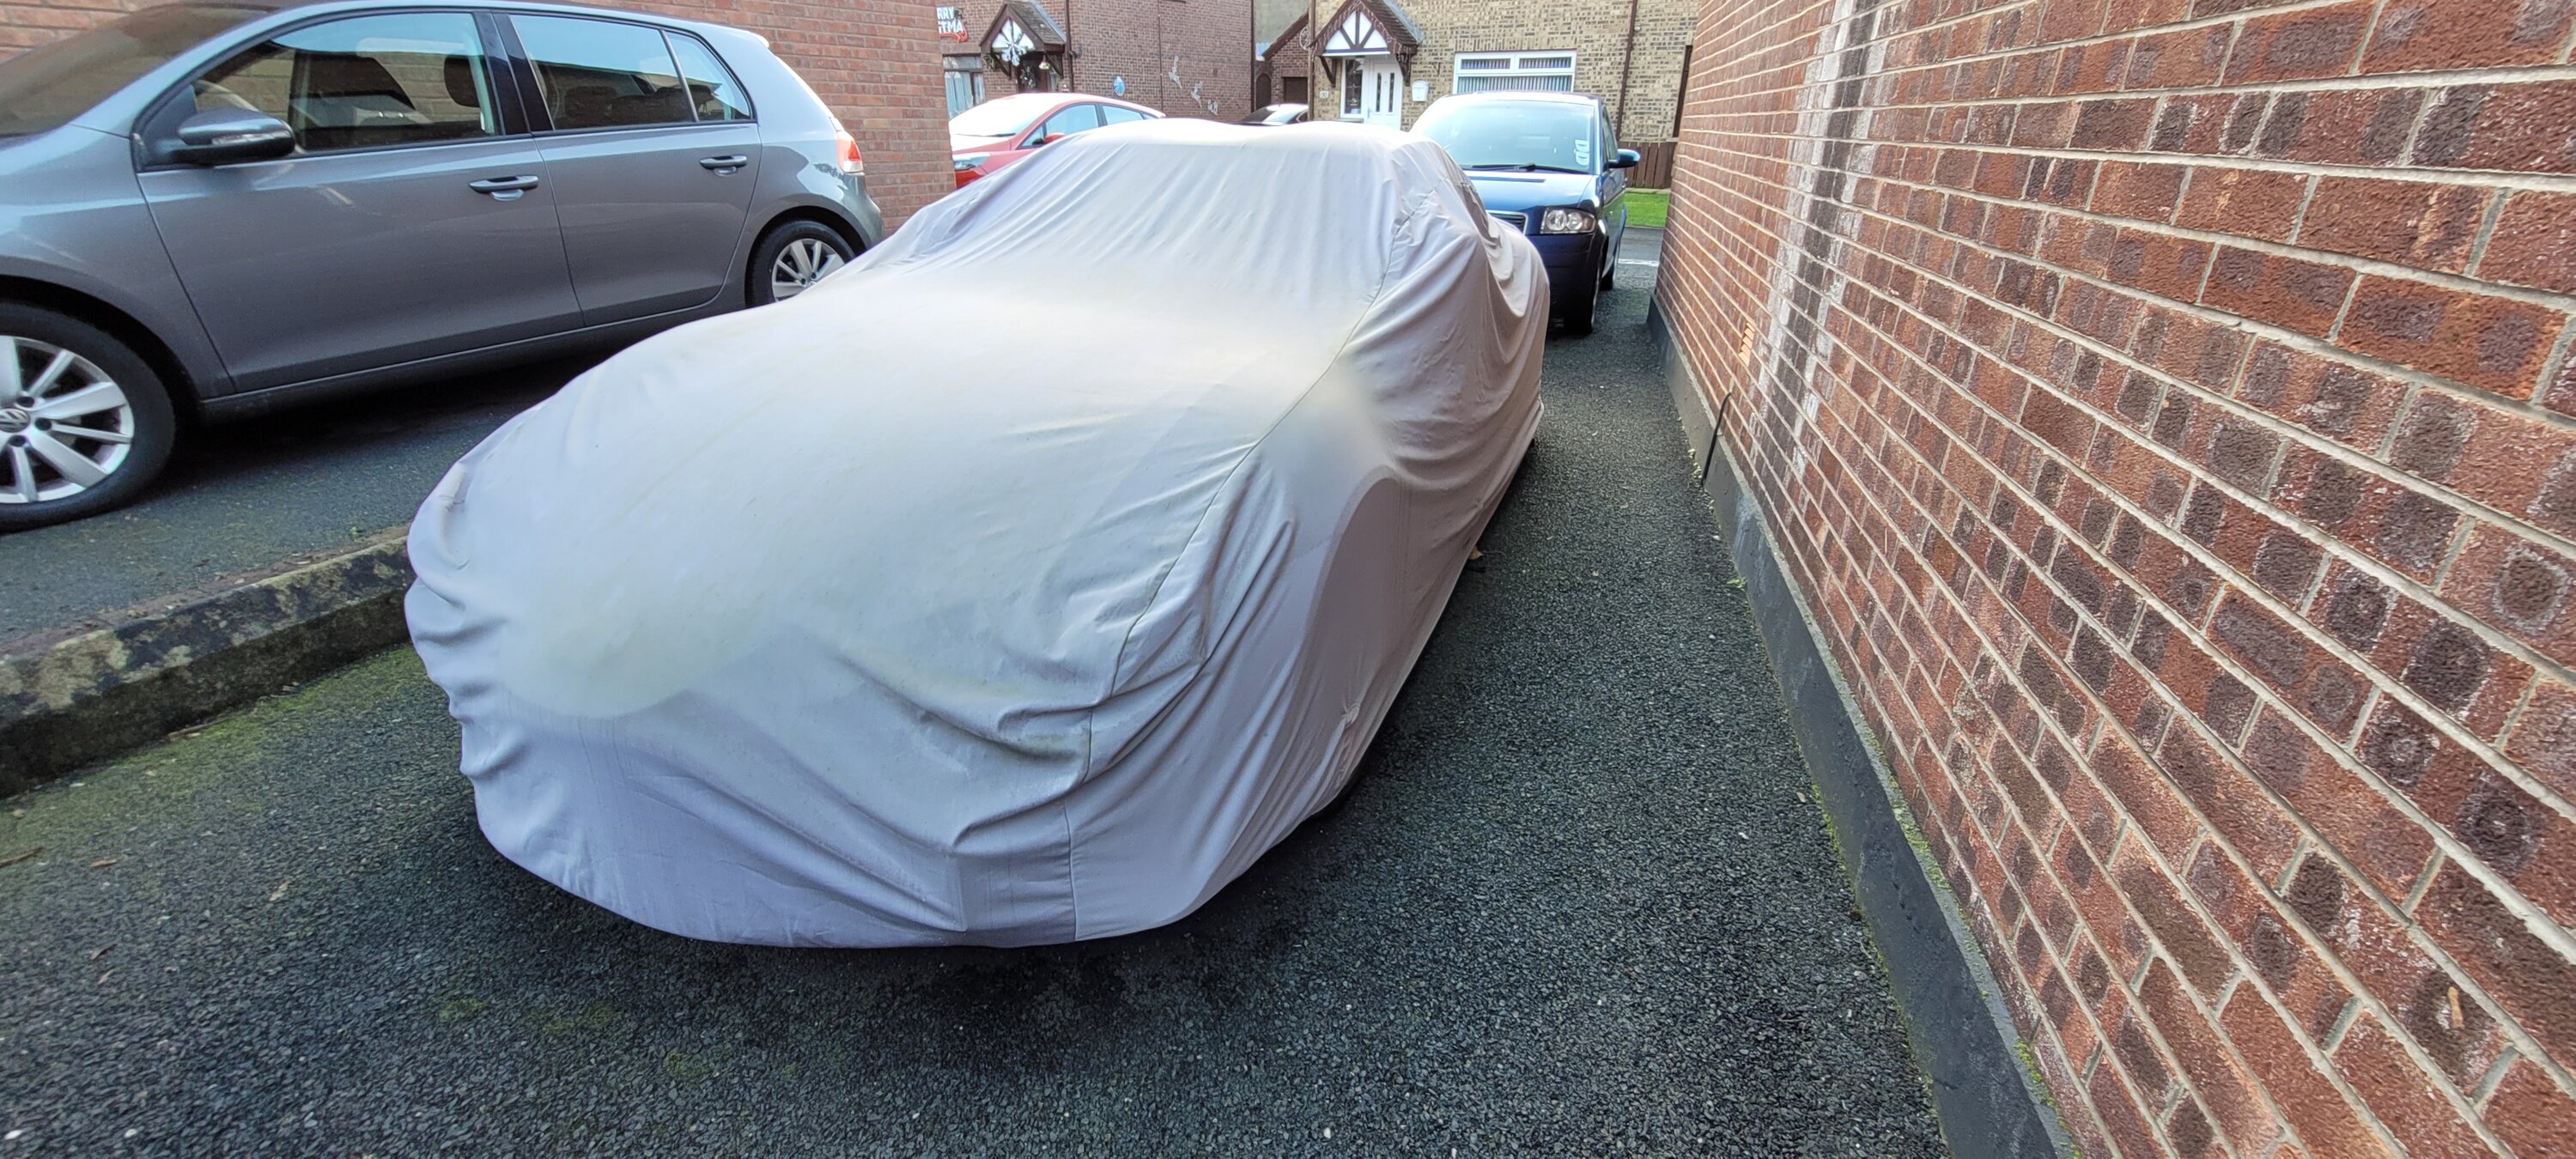  Car Cover for Toyota Supra MK5  Durable Dustproof Car Cover  Outdoor Full Car Cover Sun Waterproof Car Cover, Scratch  Proof/Durable/Breathable/Uv Protection with Zip Cotton Lined (Color : B,  Size 